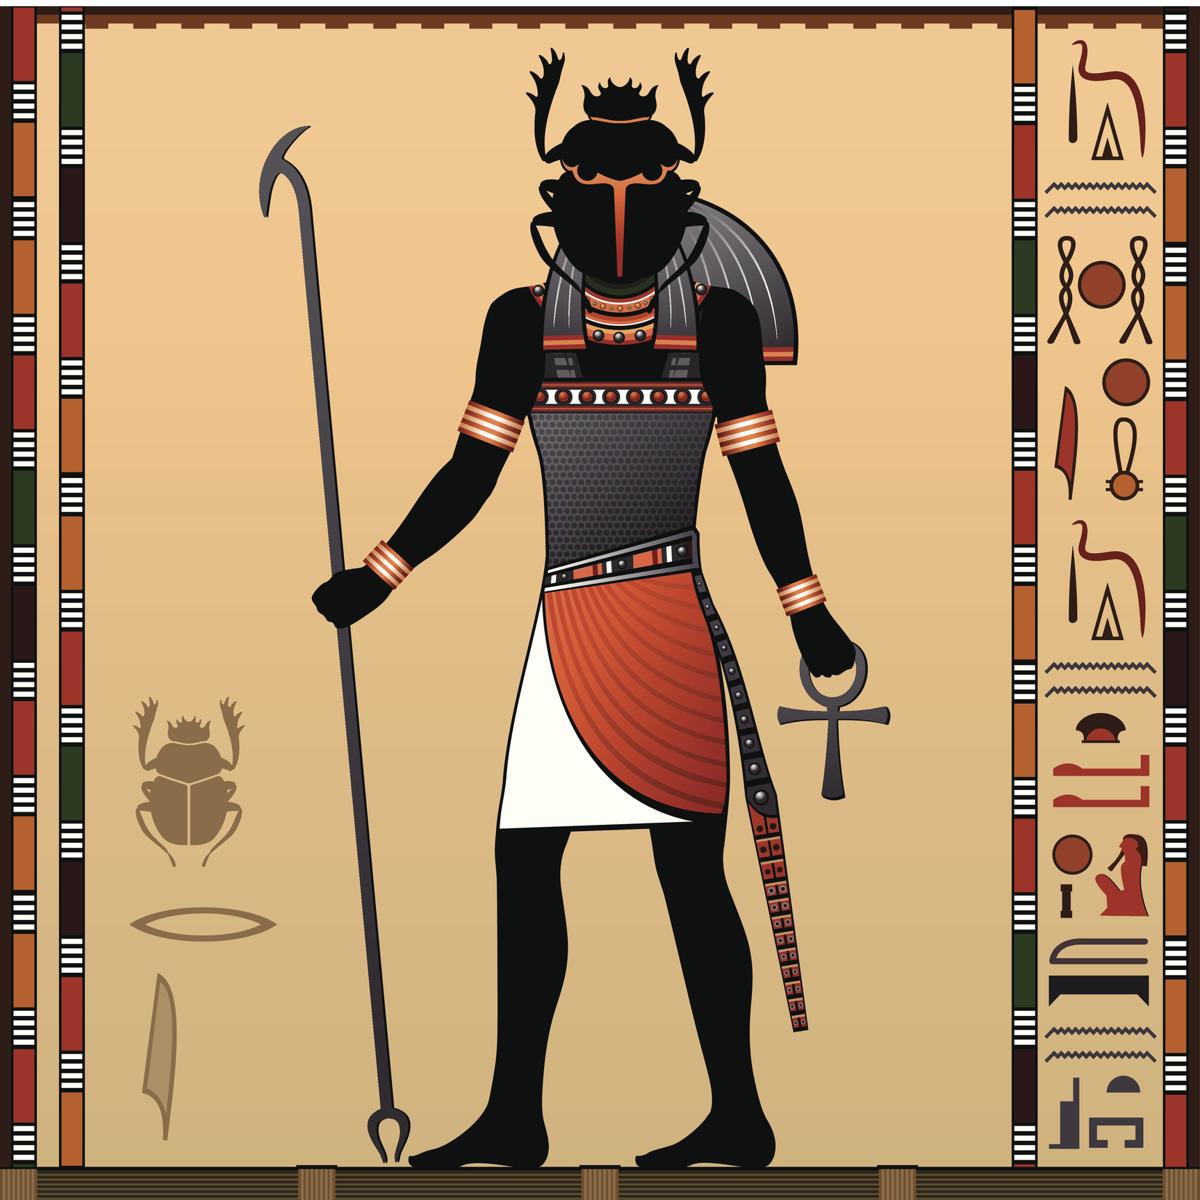 Myths Symbolism And The History Of The Egyptian Sun God